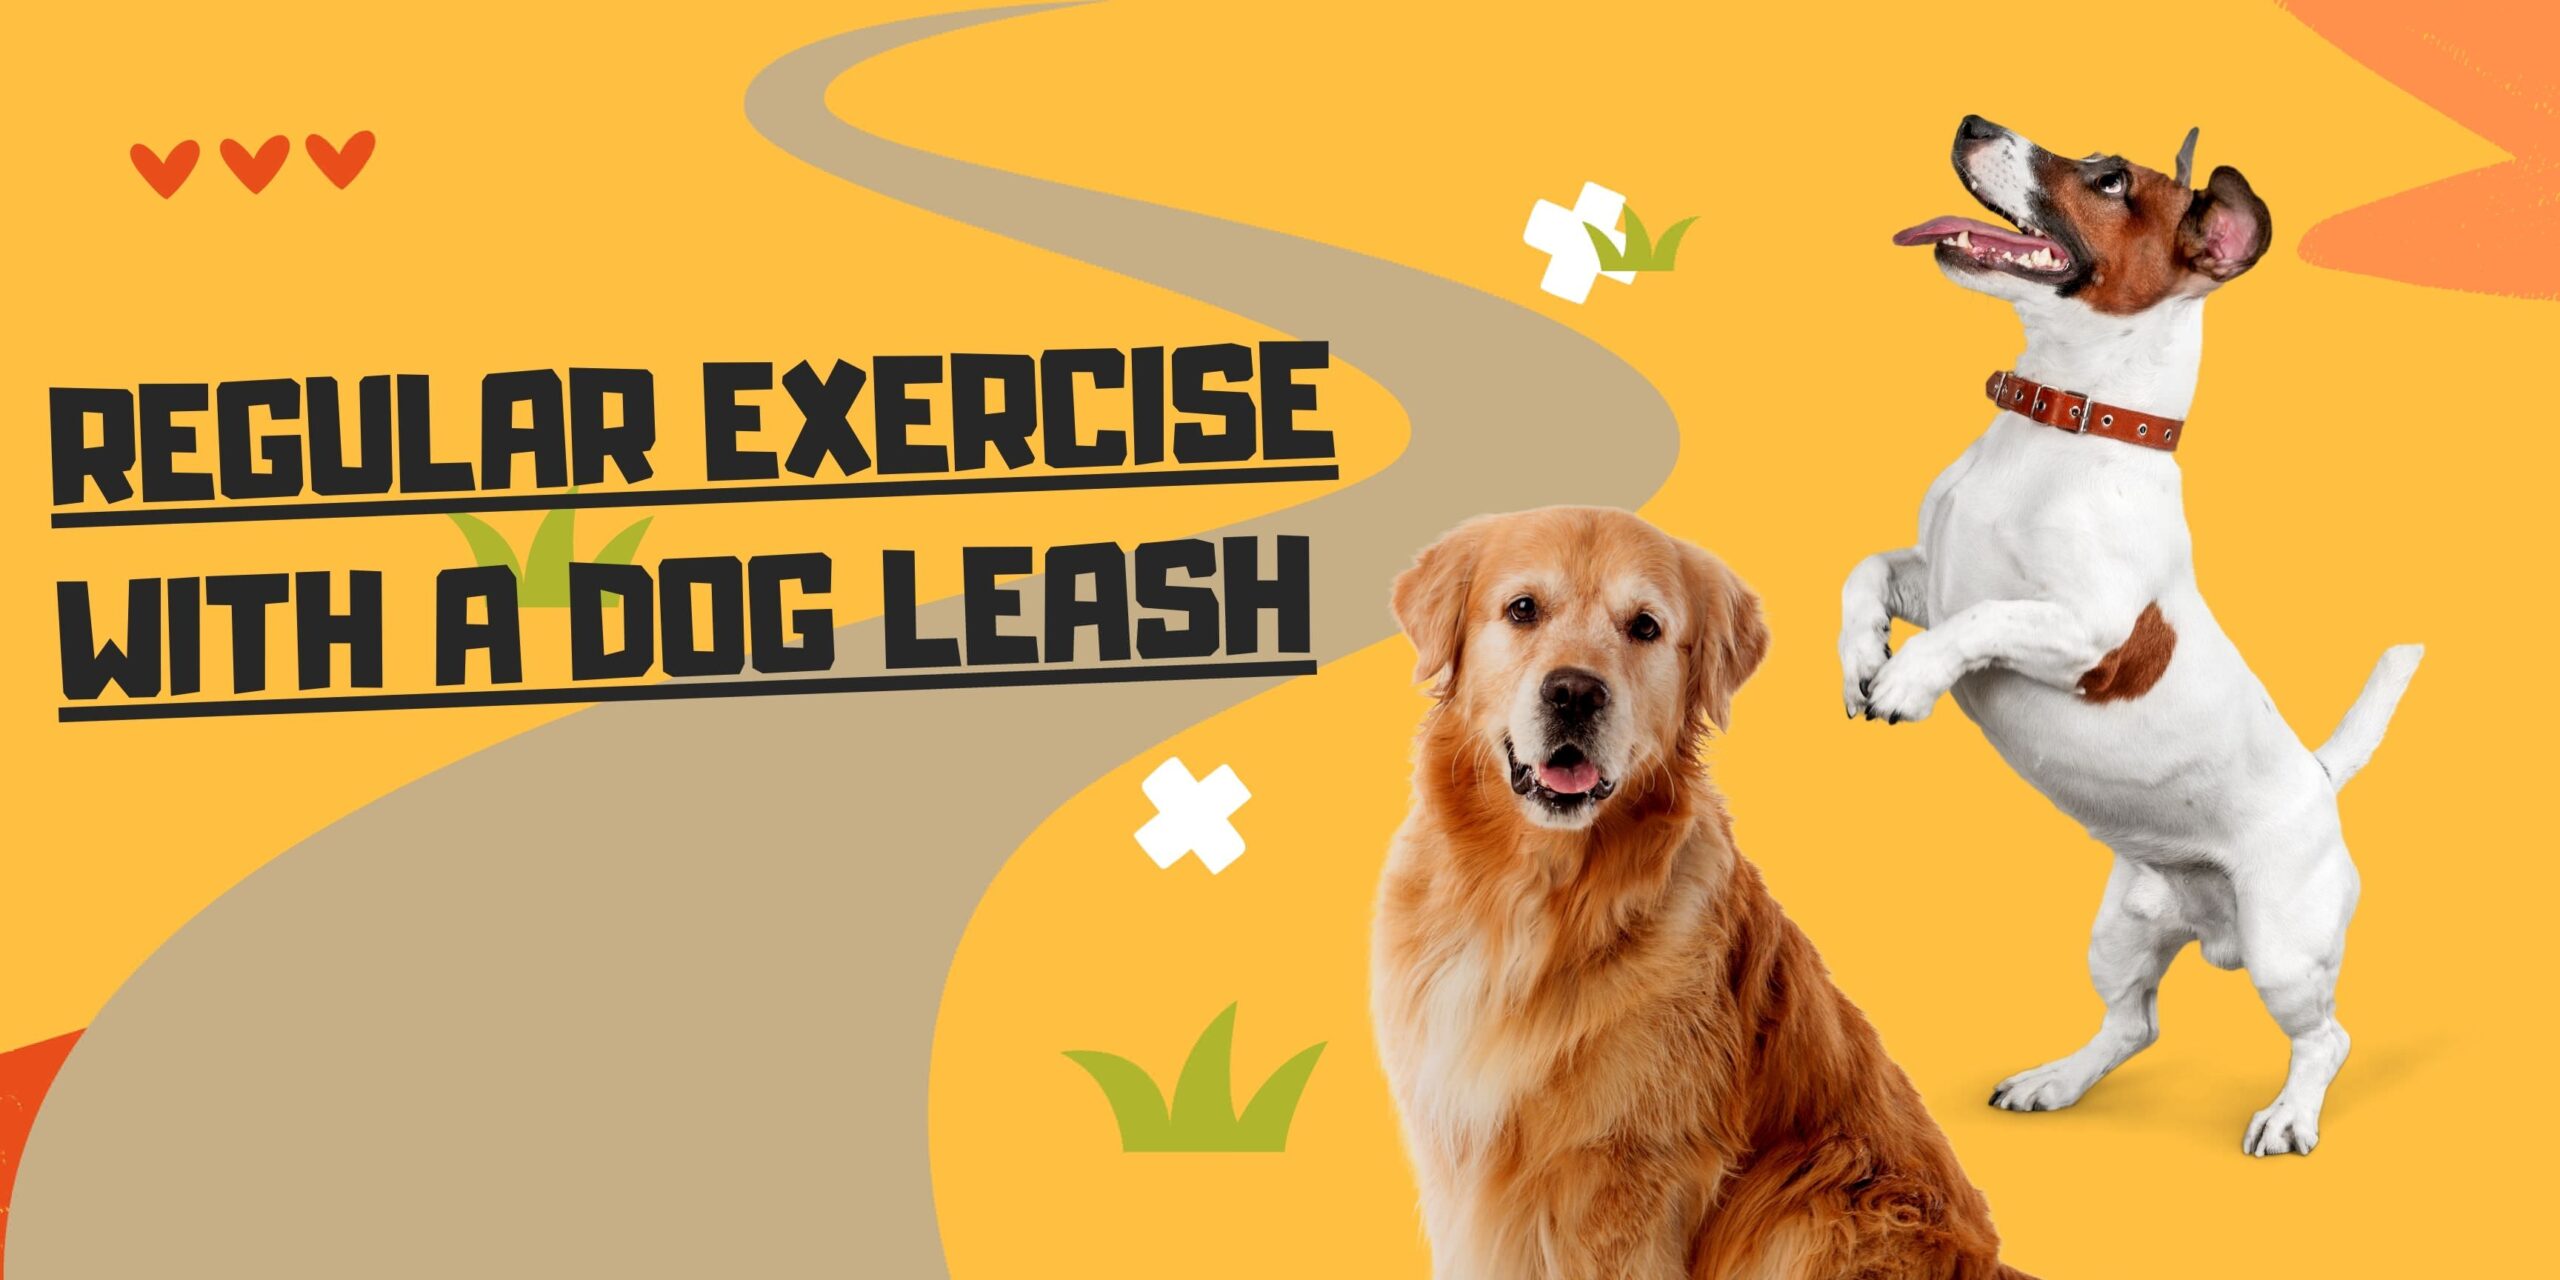 Regular Exercise with a Dog Leash